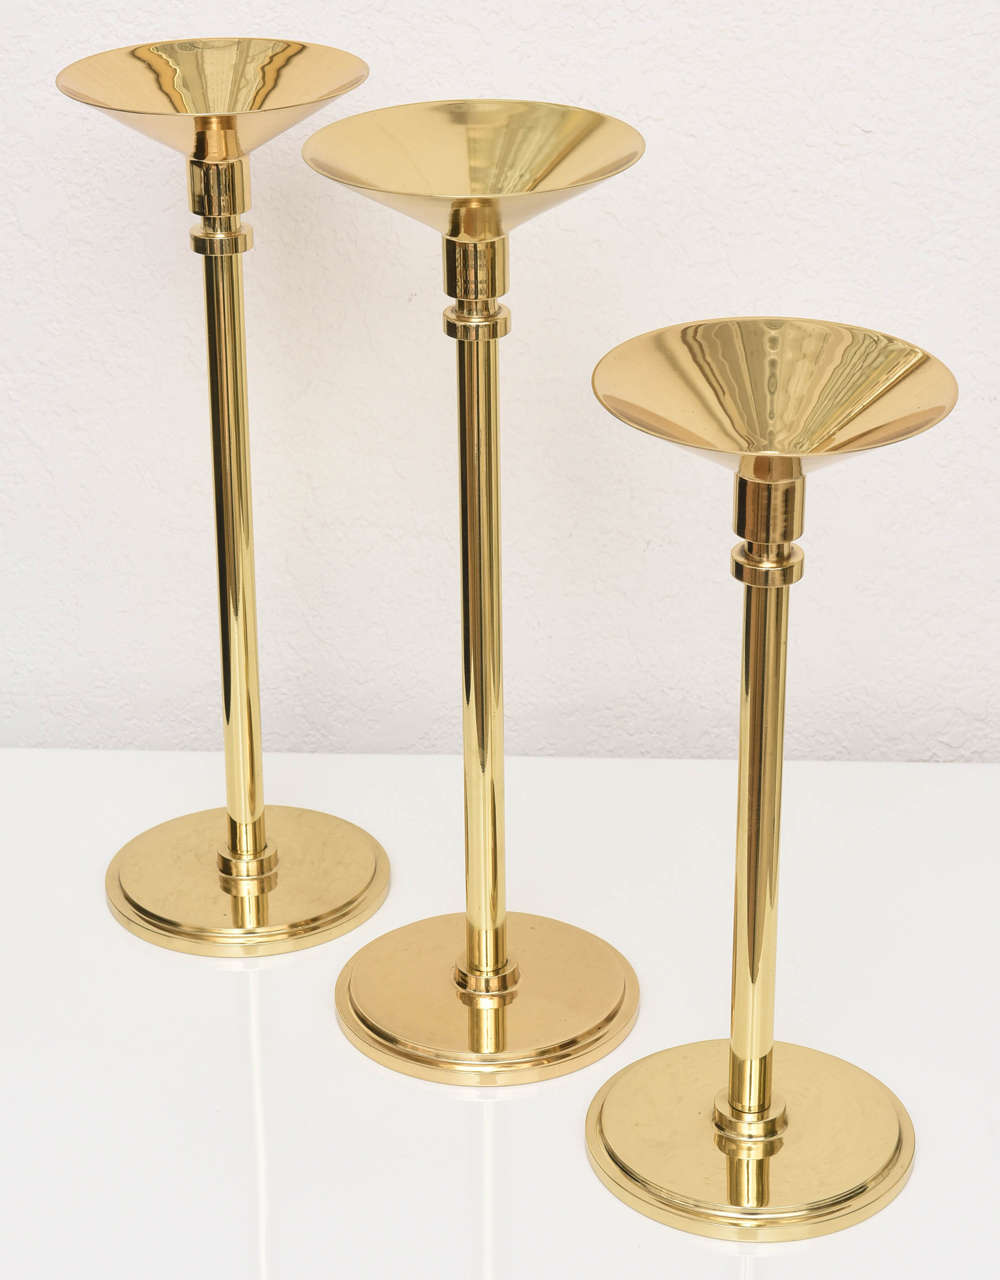 Trio of polished brass vintage candlesticks in different sizes.  Shorter single candlestick measures 12